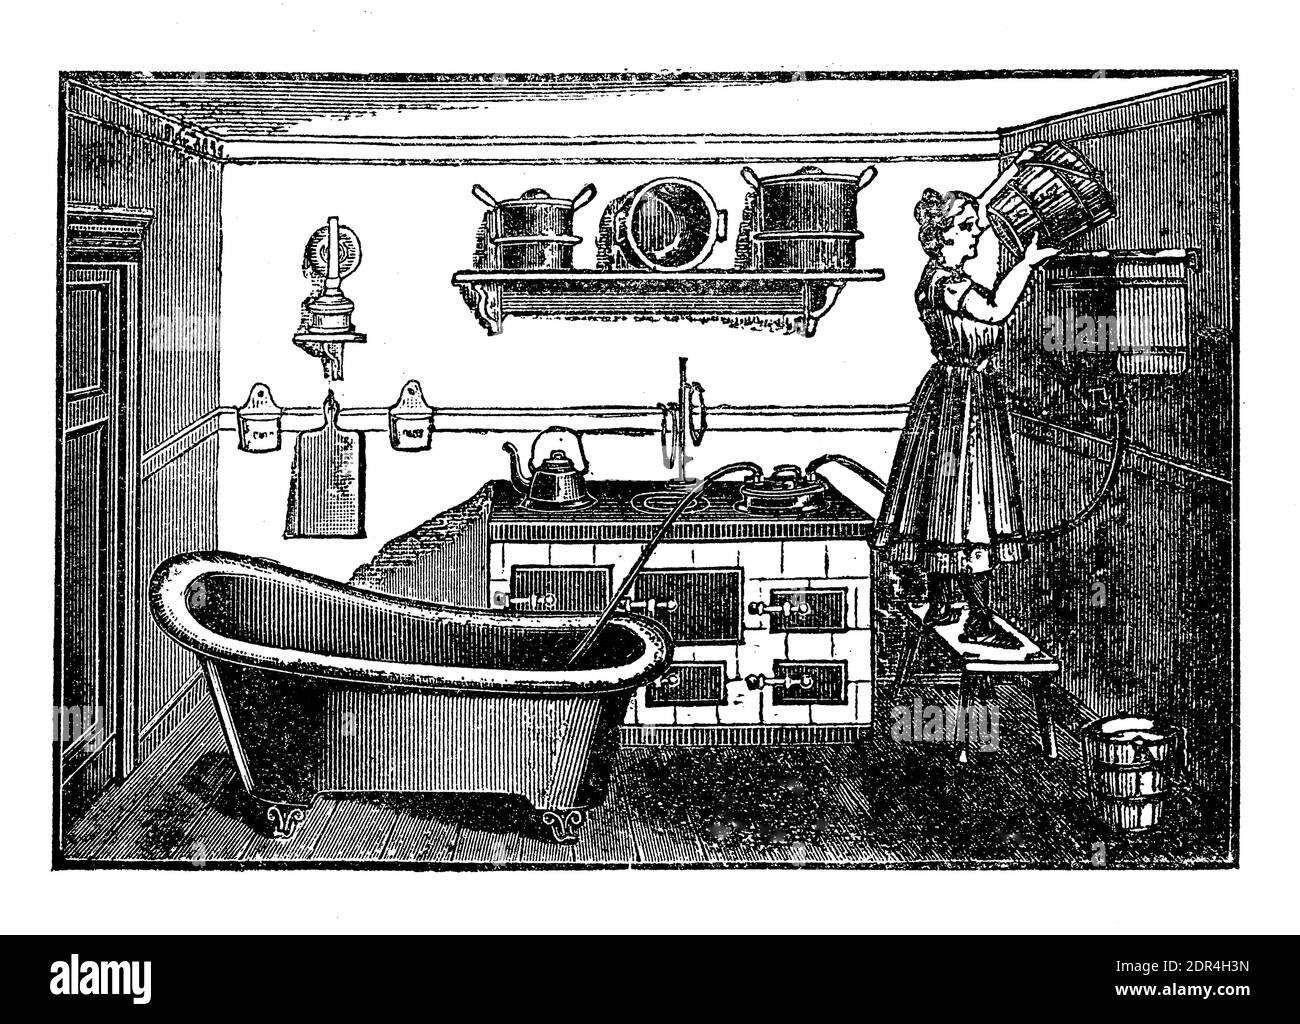 Water heather without water pipes, from the kitchen stove to heat manually with hose the bathtub water, 19th century illustration Stock Photo